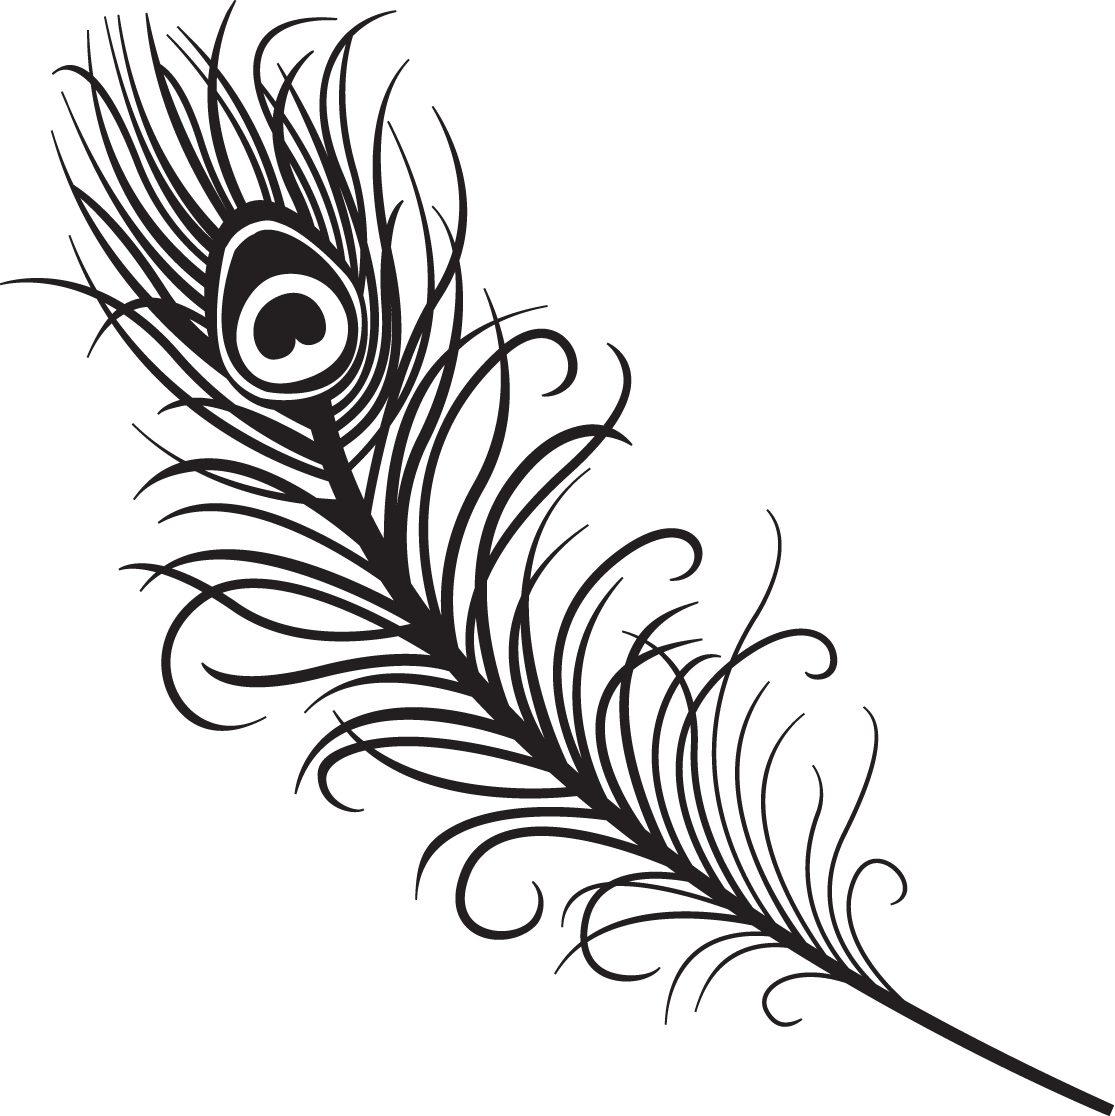 Feather clipart thanksgiving. Peacock black and white